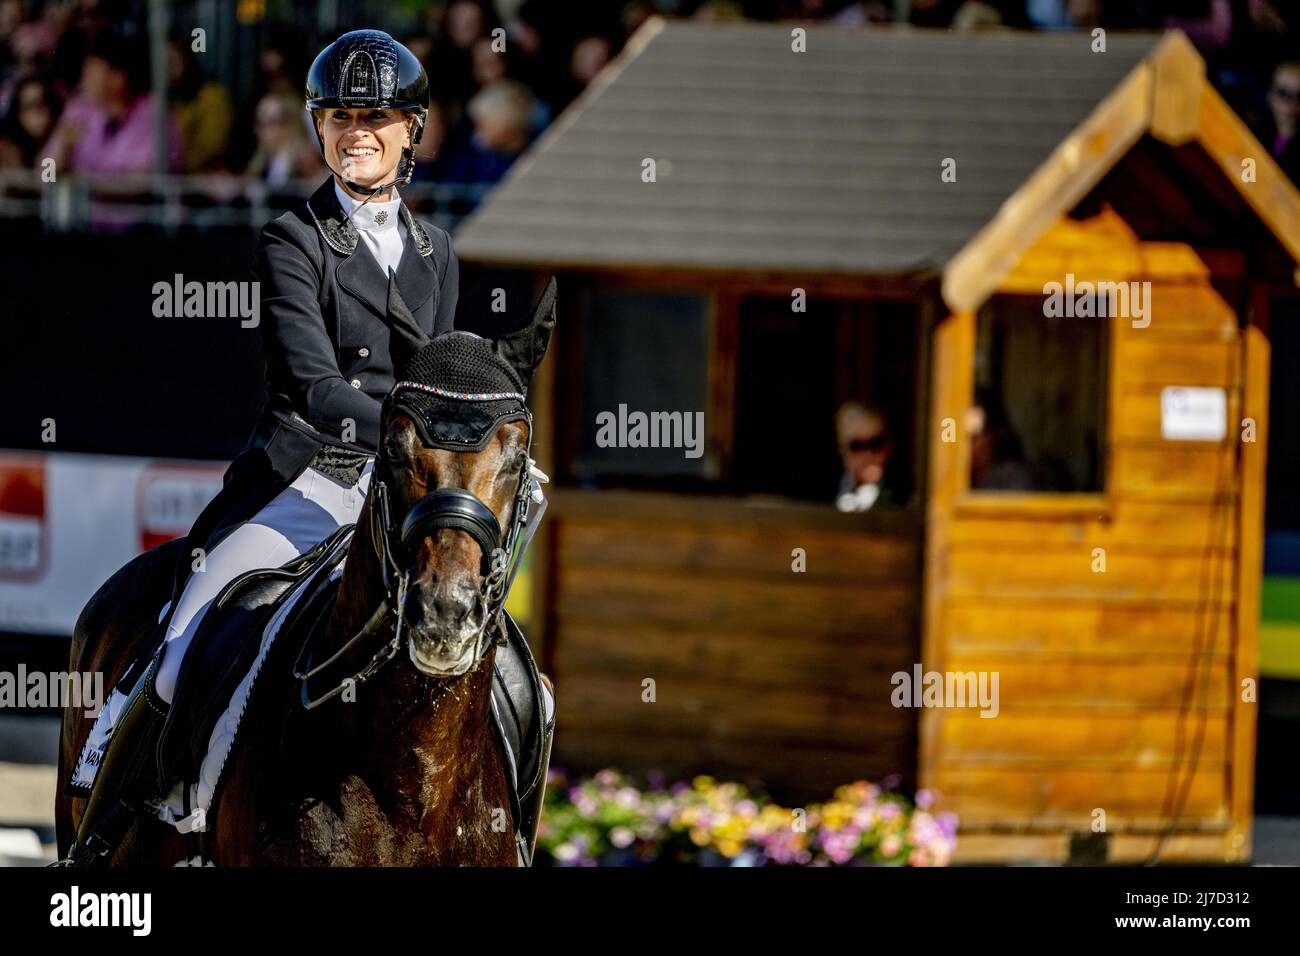 Ermelo, The Netherlands, 2022-05-08 17:02:07 ERMELO - Dinja van Liere and Hermès became champion during the Dutch dressage championship. ANP ROBIN UTRECHT netherlands out - belgium out Stock Photo